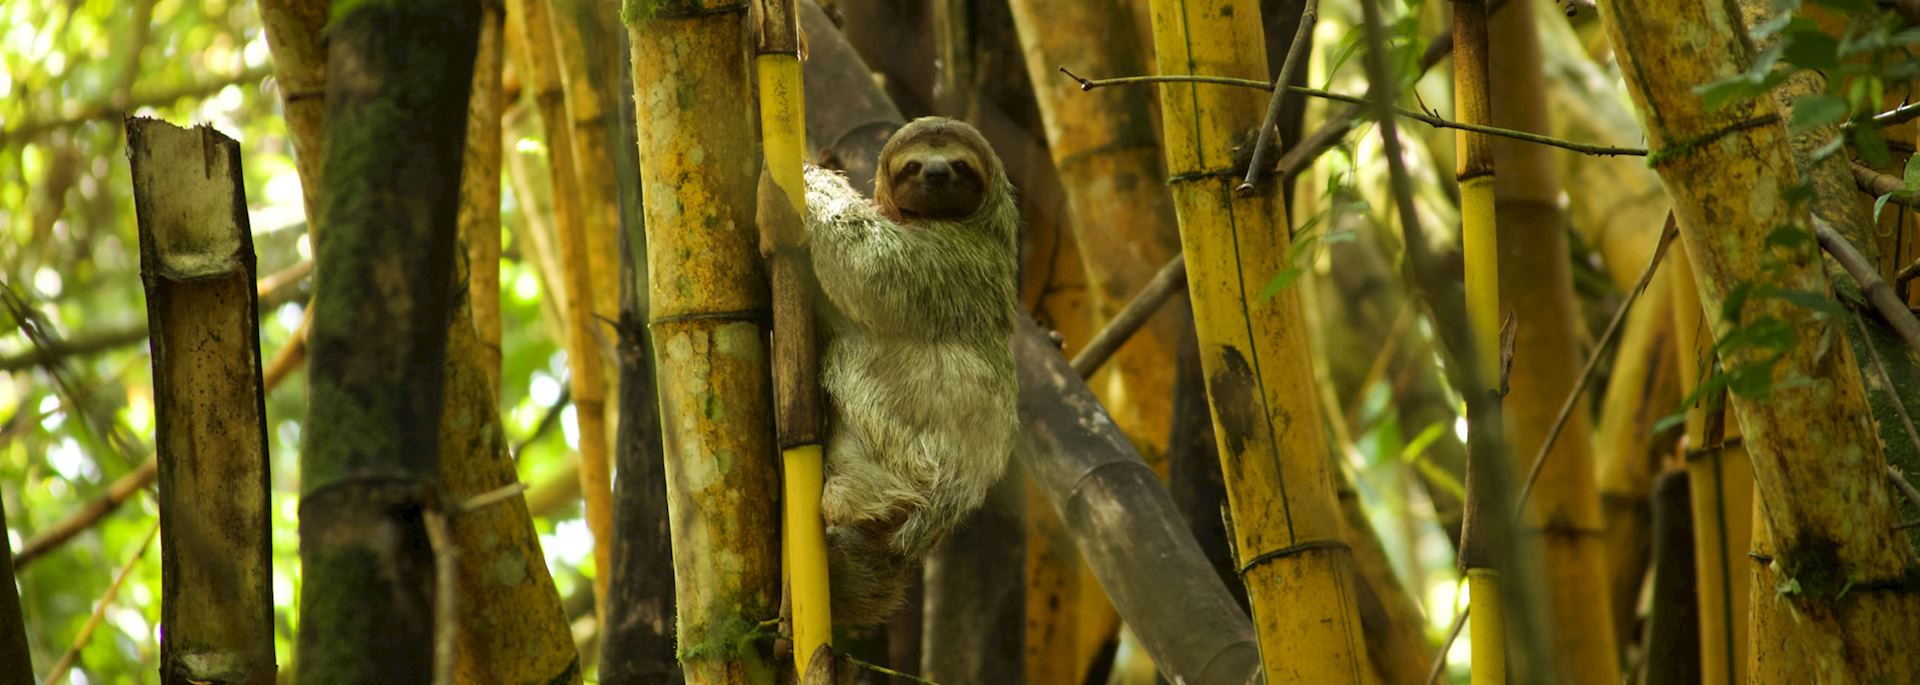 Sloth in a bamboo tree in Costa Rica